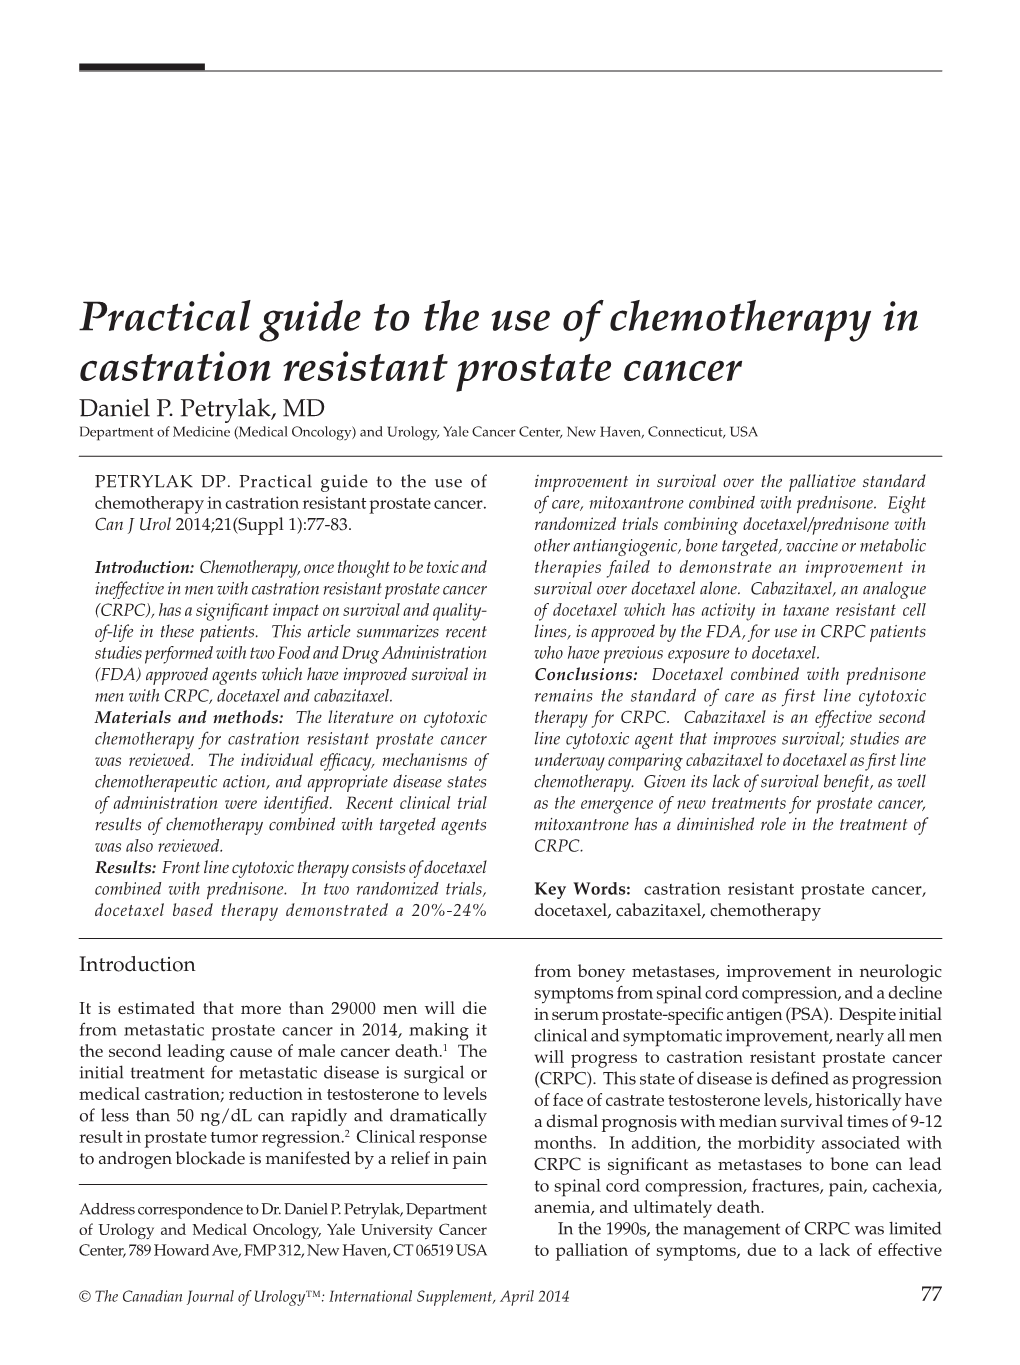 Practical Guide to the Use of Chemotherapy in Castration Resistant Prostate Cancer Daniel P